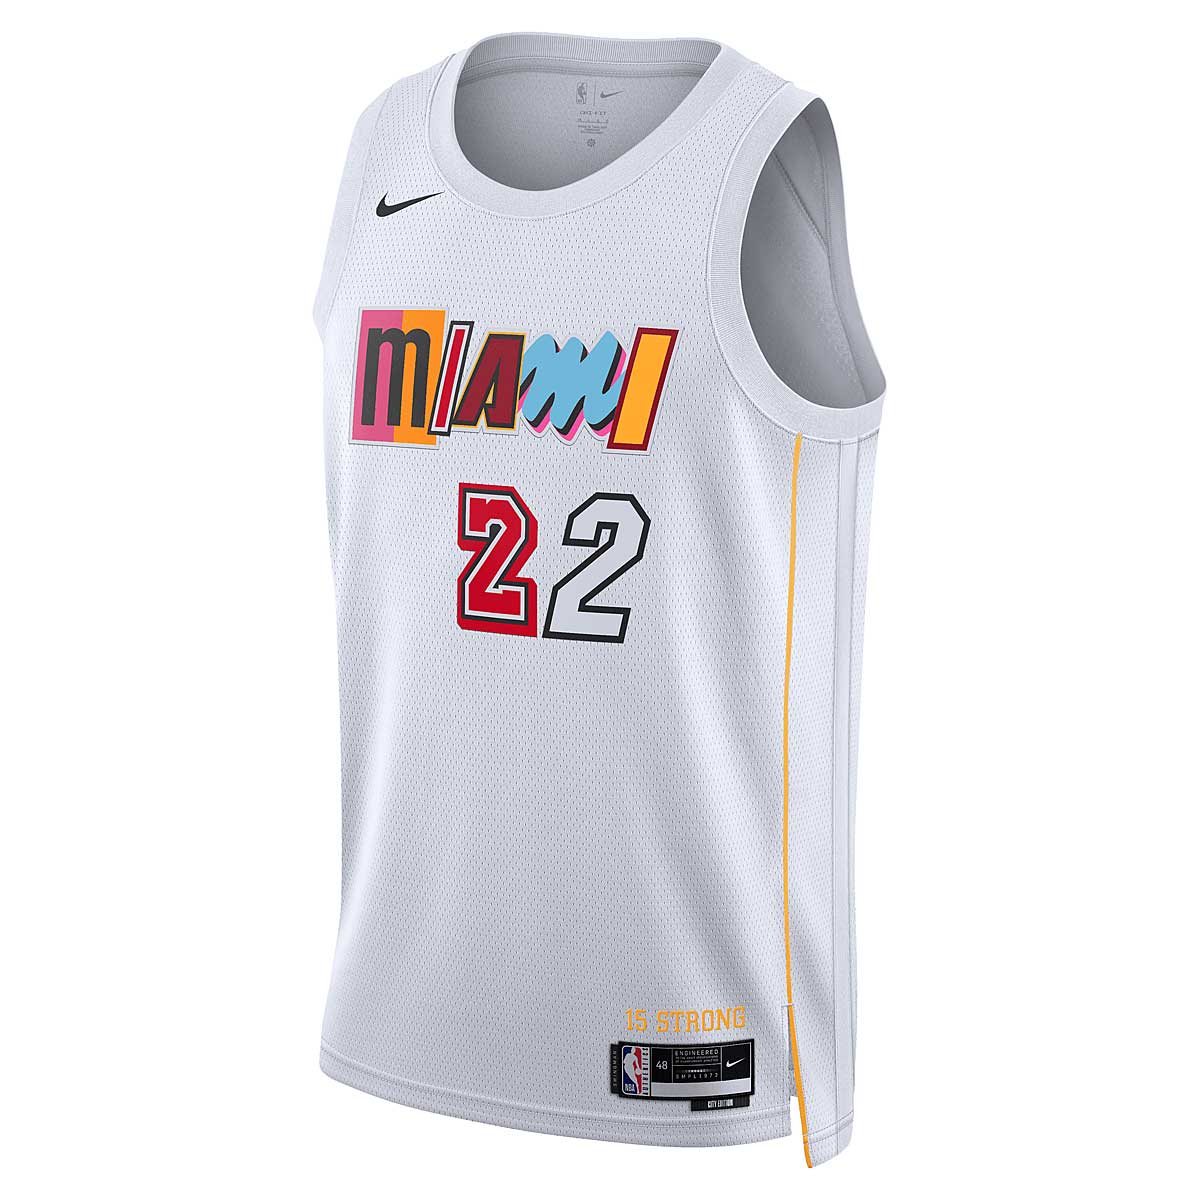 Jimmy Butler Miami Heat Classic Jersey for Sale in Miami, FL - OfferUp